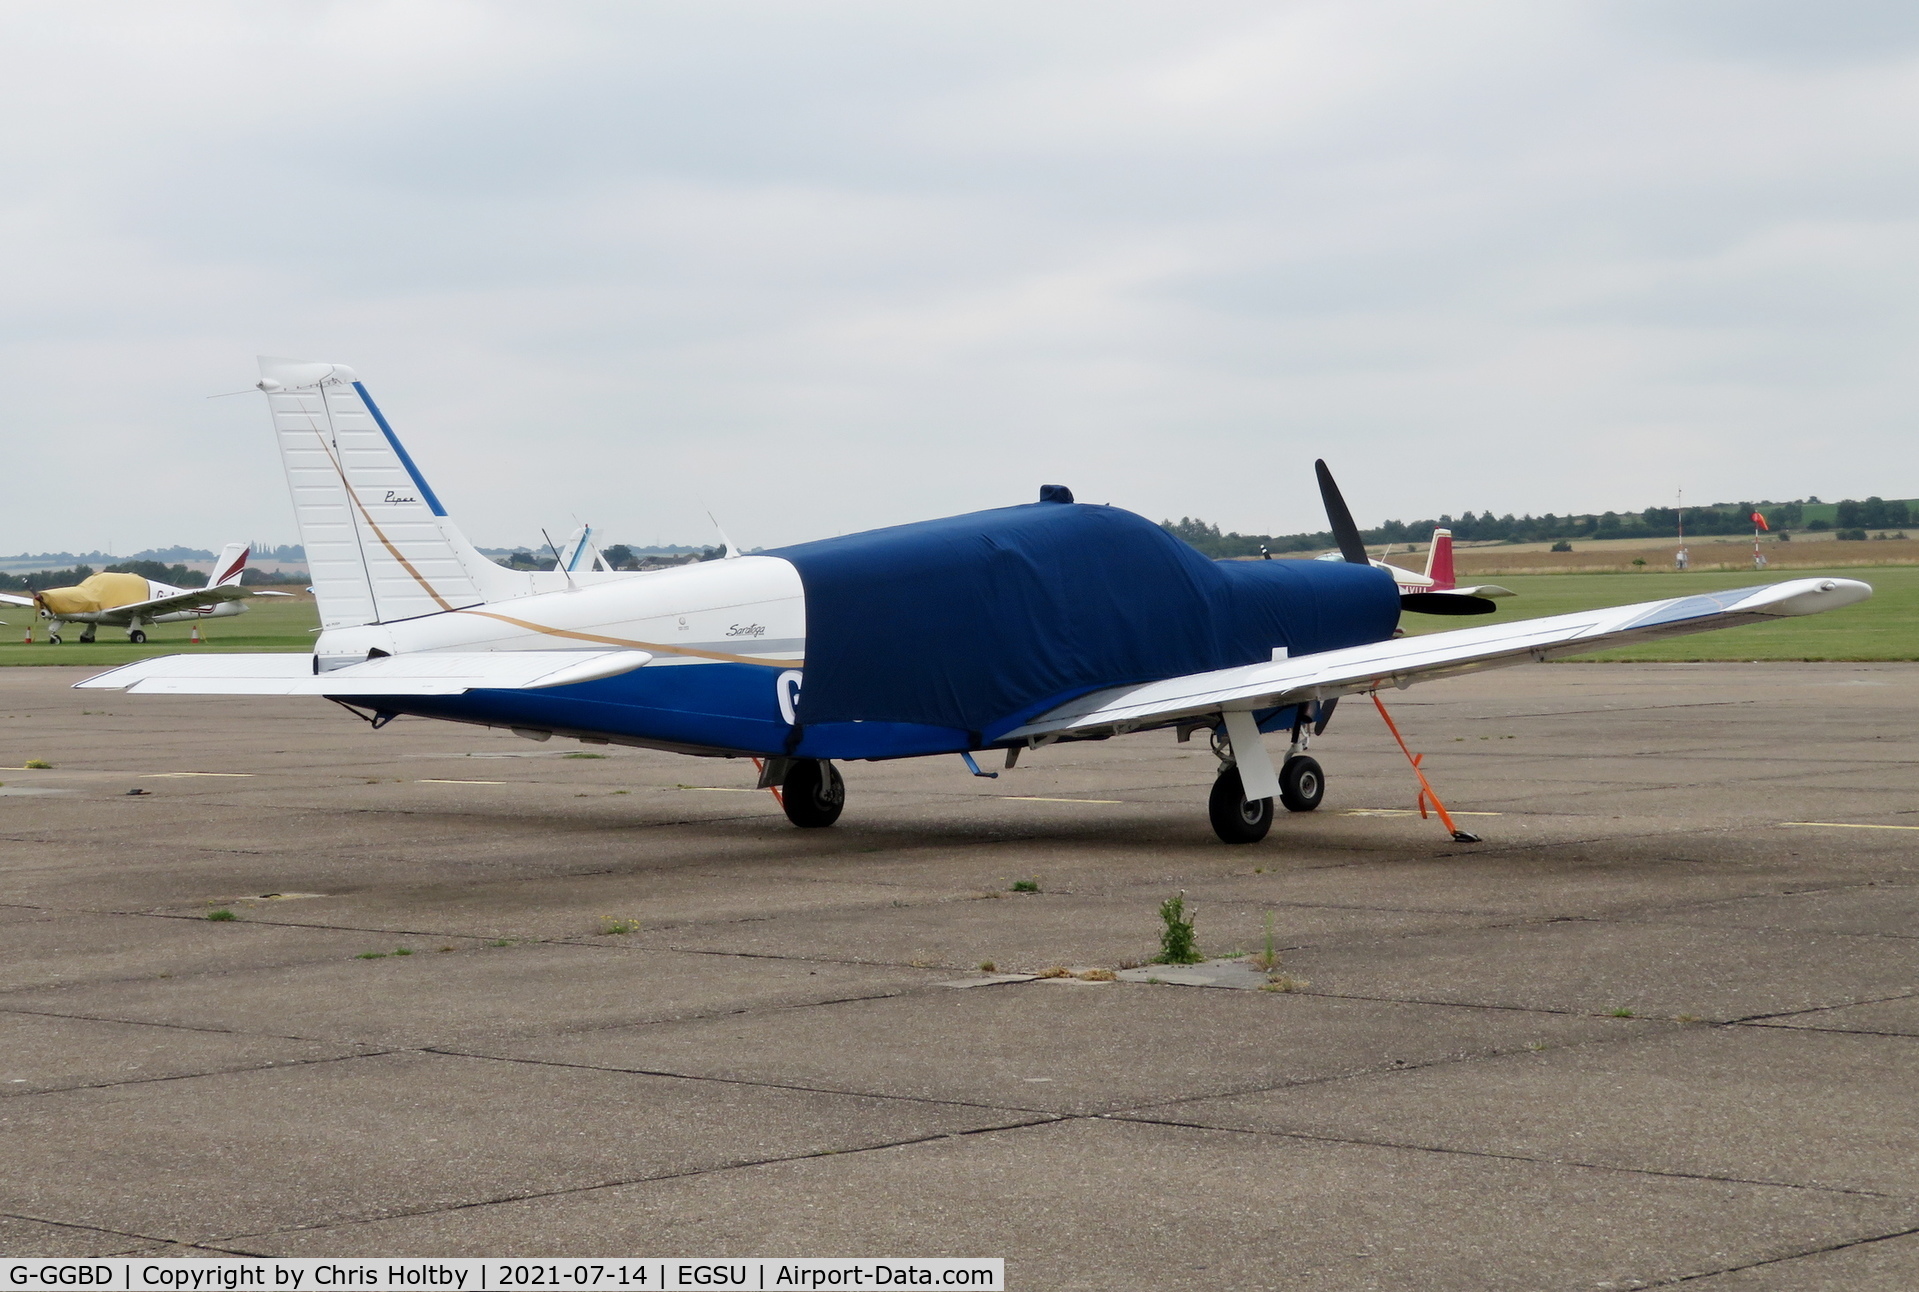 G-GGBD, 1981 Piper PA-32R-301T Turbo Saratoga C/N 32R-8129110, 1981 Saratoga now privately owned in Stowmarket & re-registered, was F-GGBD